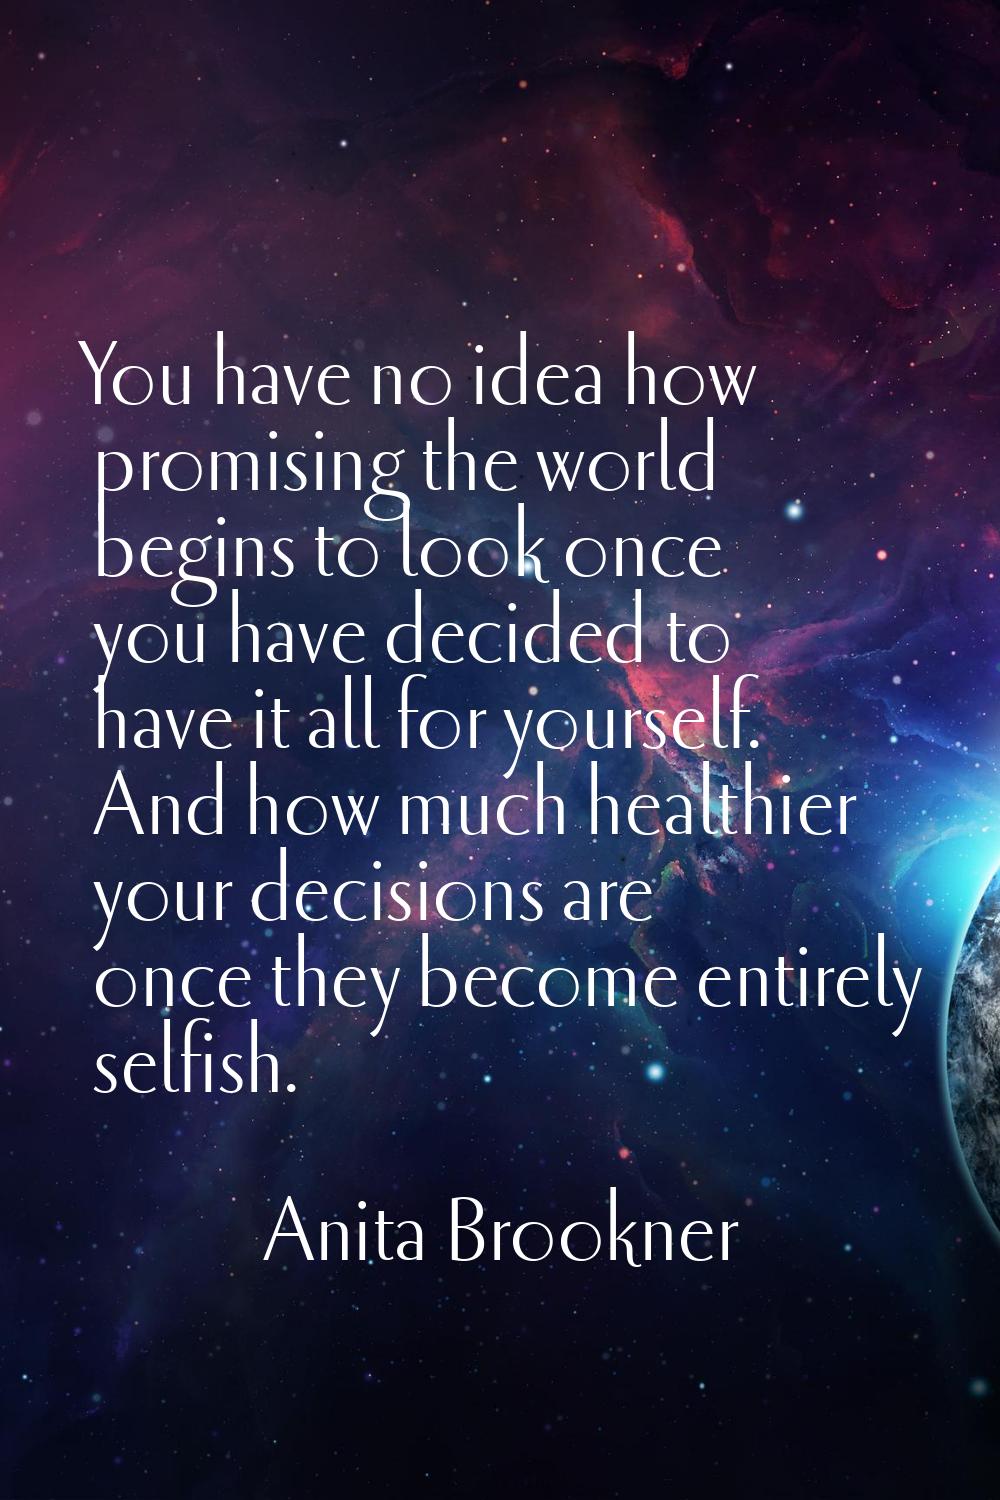 You have no idea how promising the world begins to look once you have decided to have it all for yo